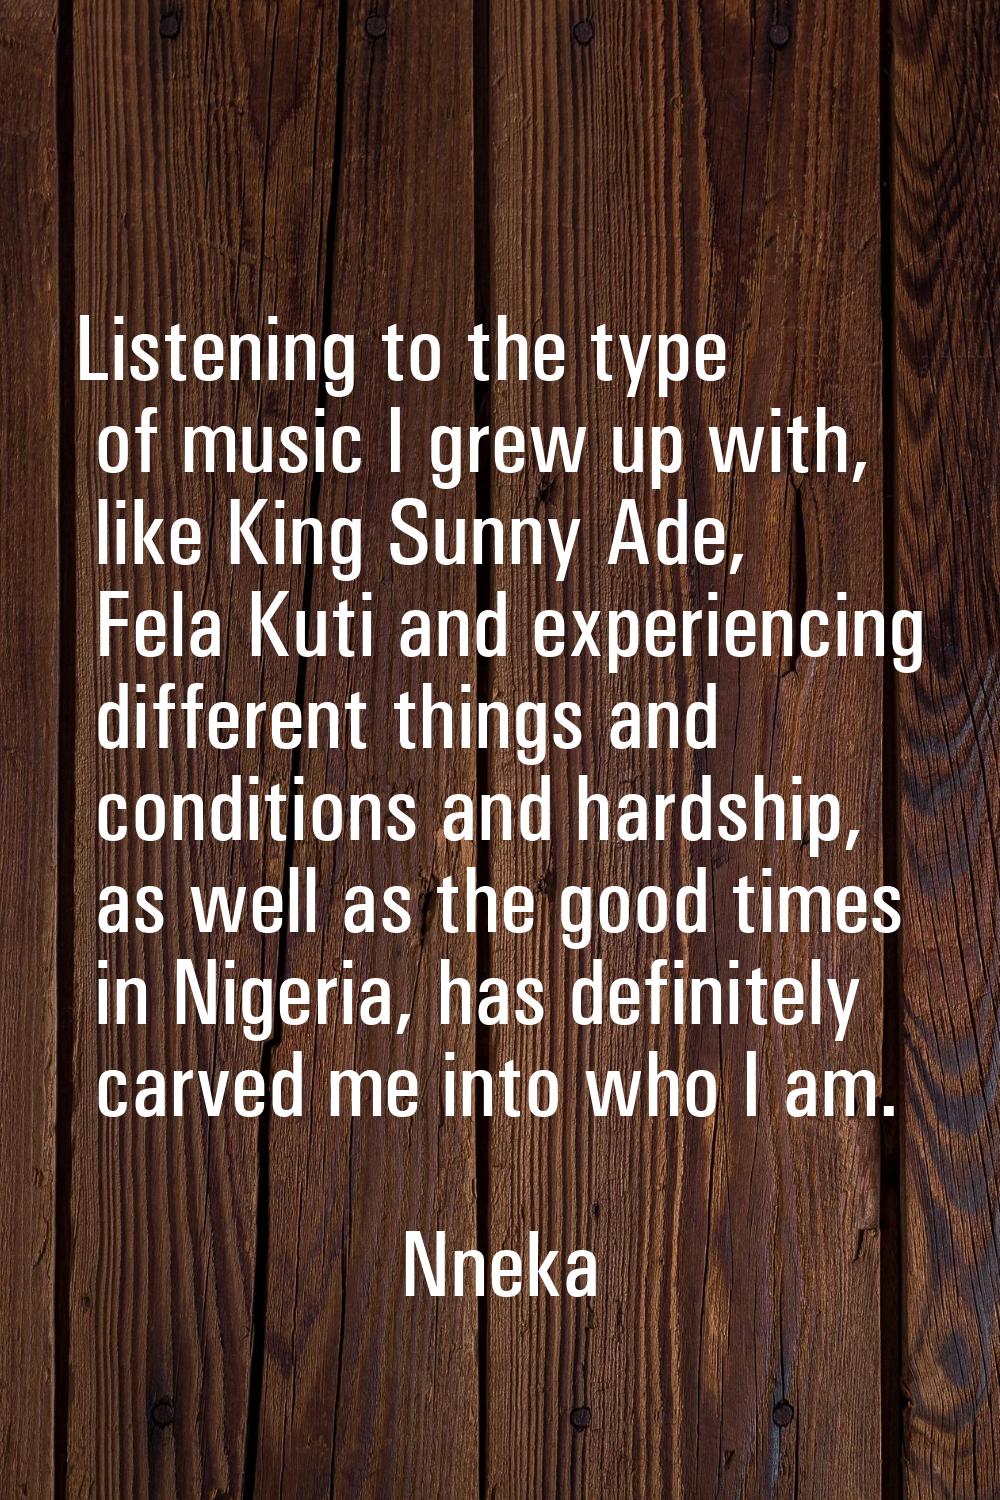 Listening to the type of music I grew up with, like King Sunny Ade, Fela Kuti and experiencing diff